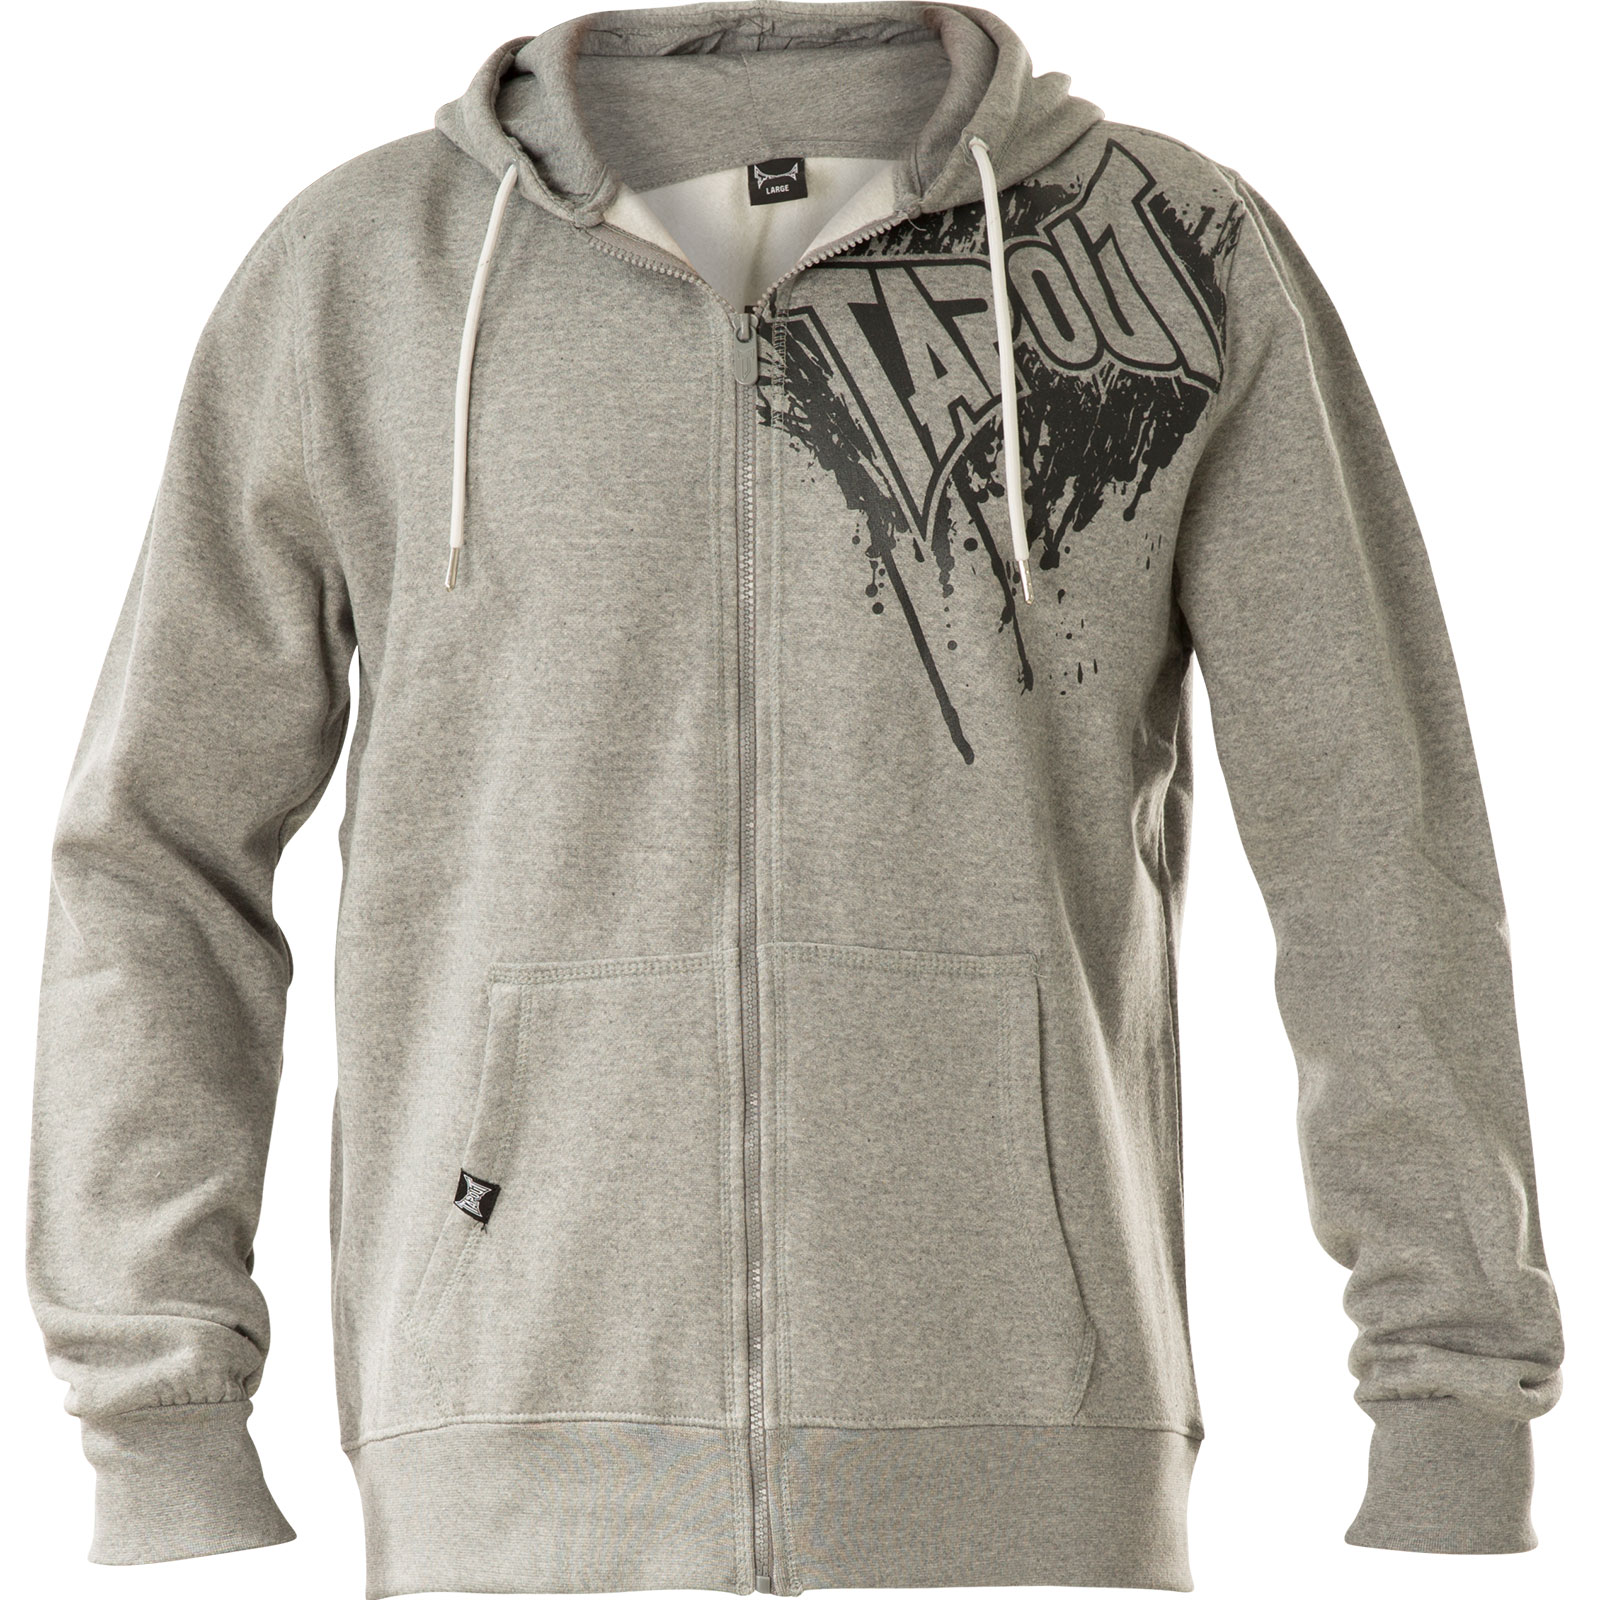 Tapout Logo ZT Hoody Print with a splash of colour